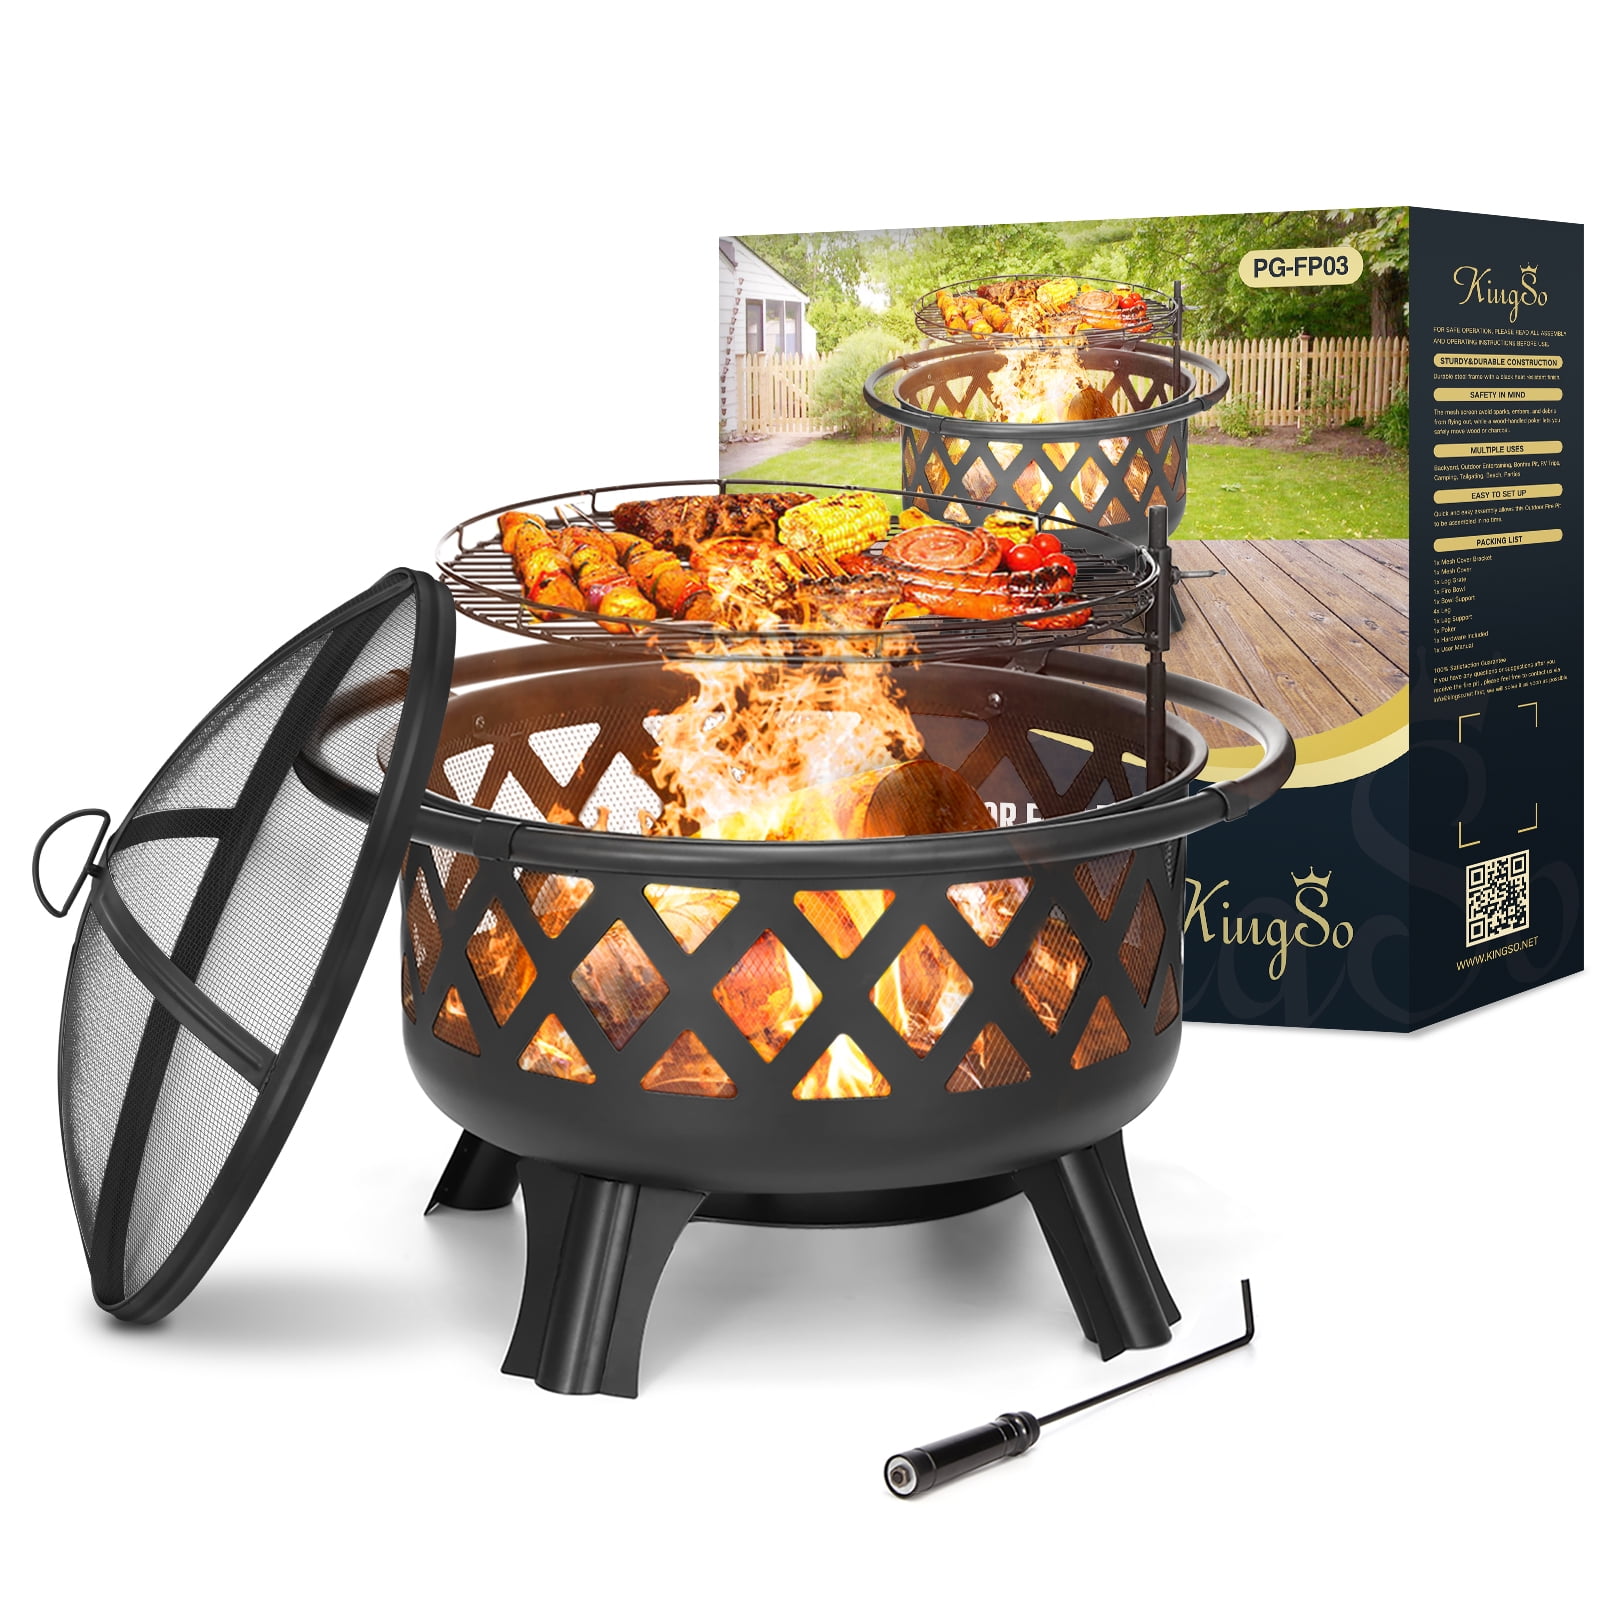 Giantex Outdoor Firepit Wood Burning Patio & Backyard Fire Pit Black Curved Legs Round Picnic Firebowl Portable Folding Metal 30 Fire Bowl with BBQ Grill Spark Screen Cover and Poker 